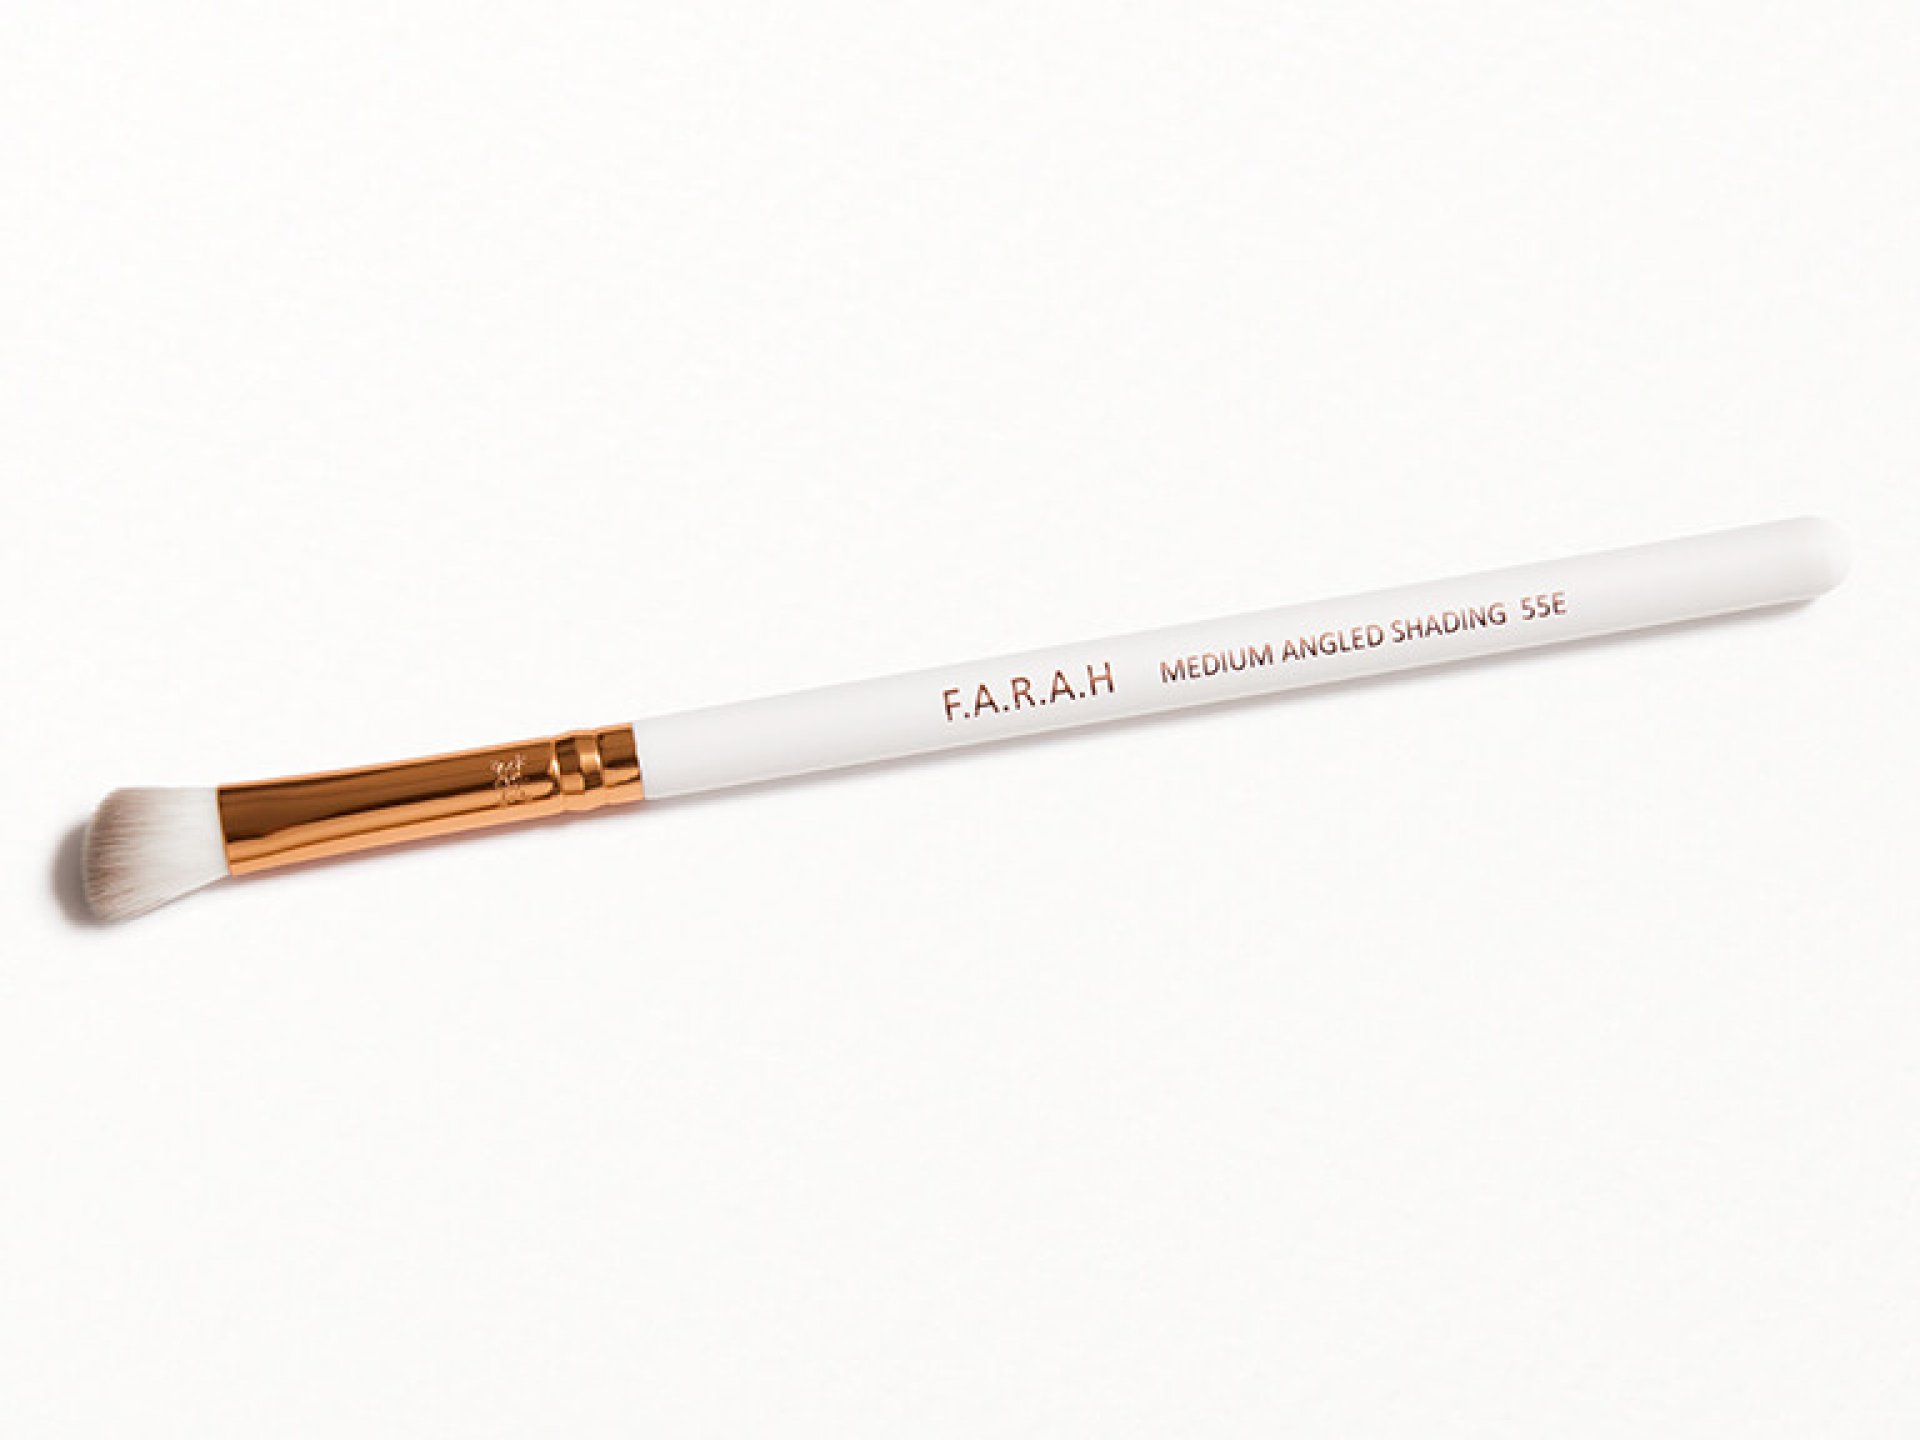 F.A.R.A.H Medium Angled Shading 55E Rose Gold Collection